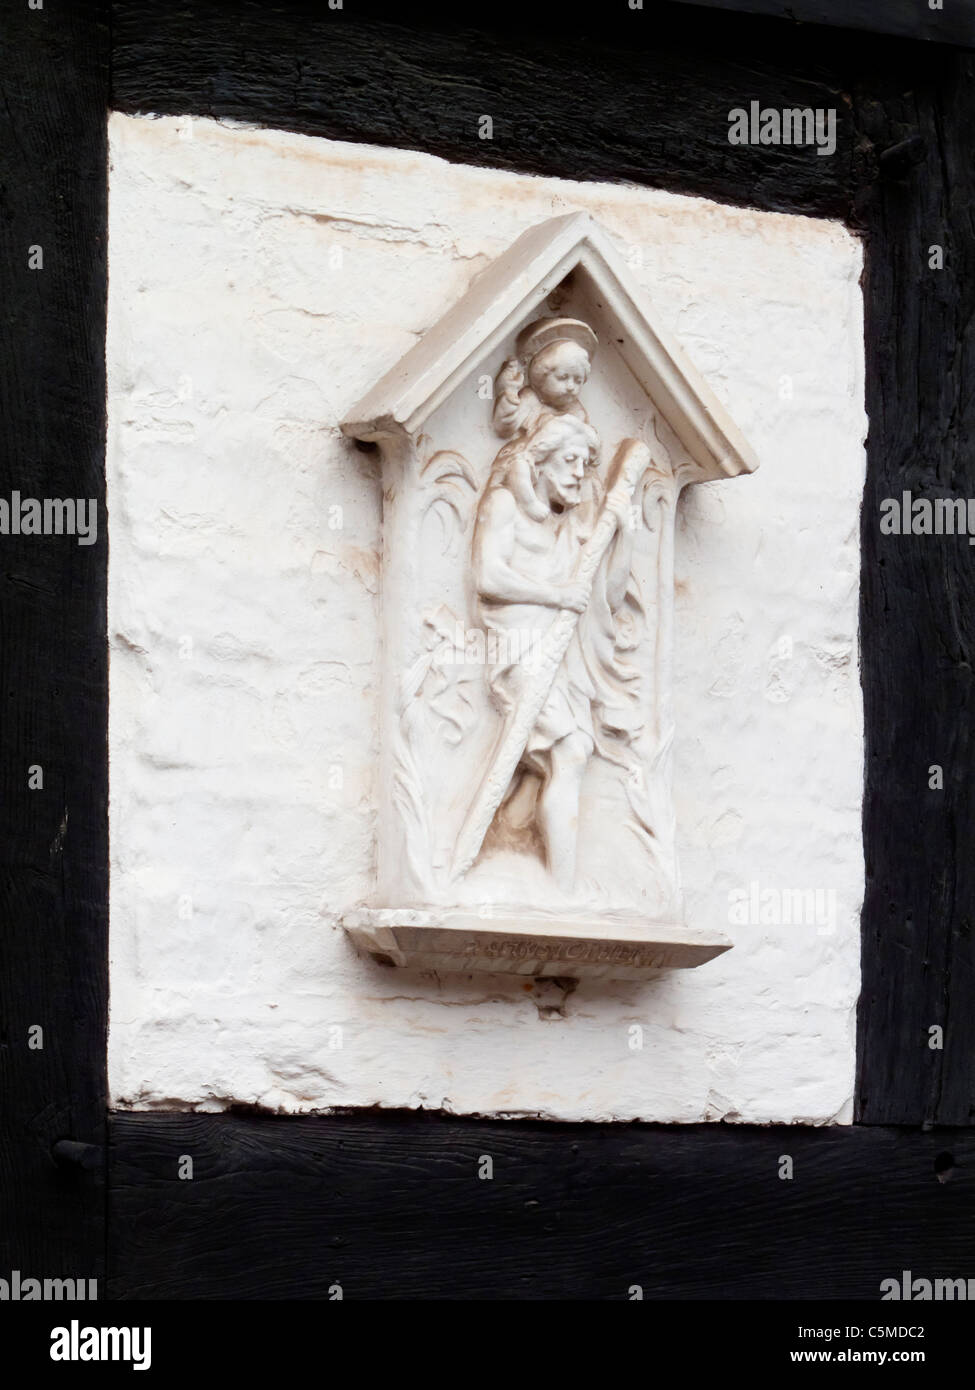 Detail of decorative religious sculpture outside a Tudor house in Lichfield Staffordshire England UK Stock Photo